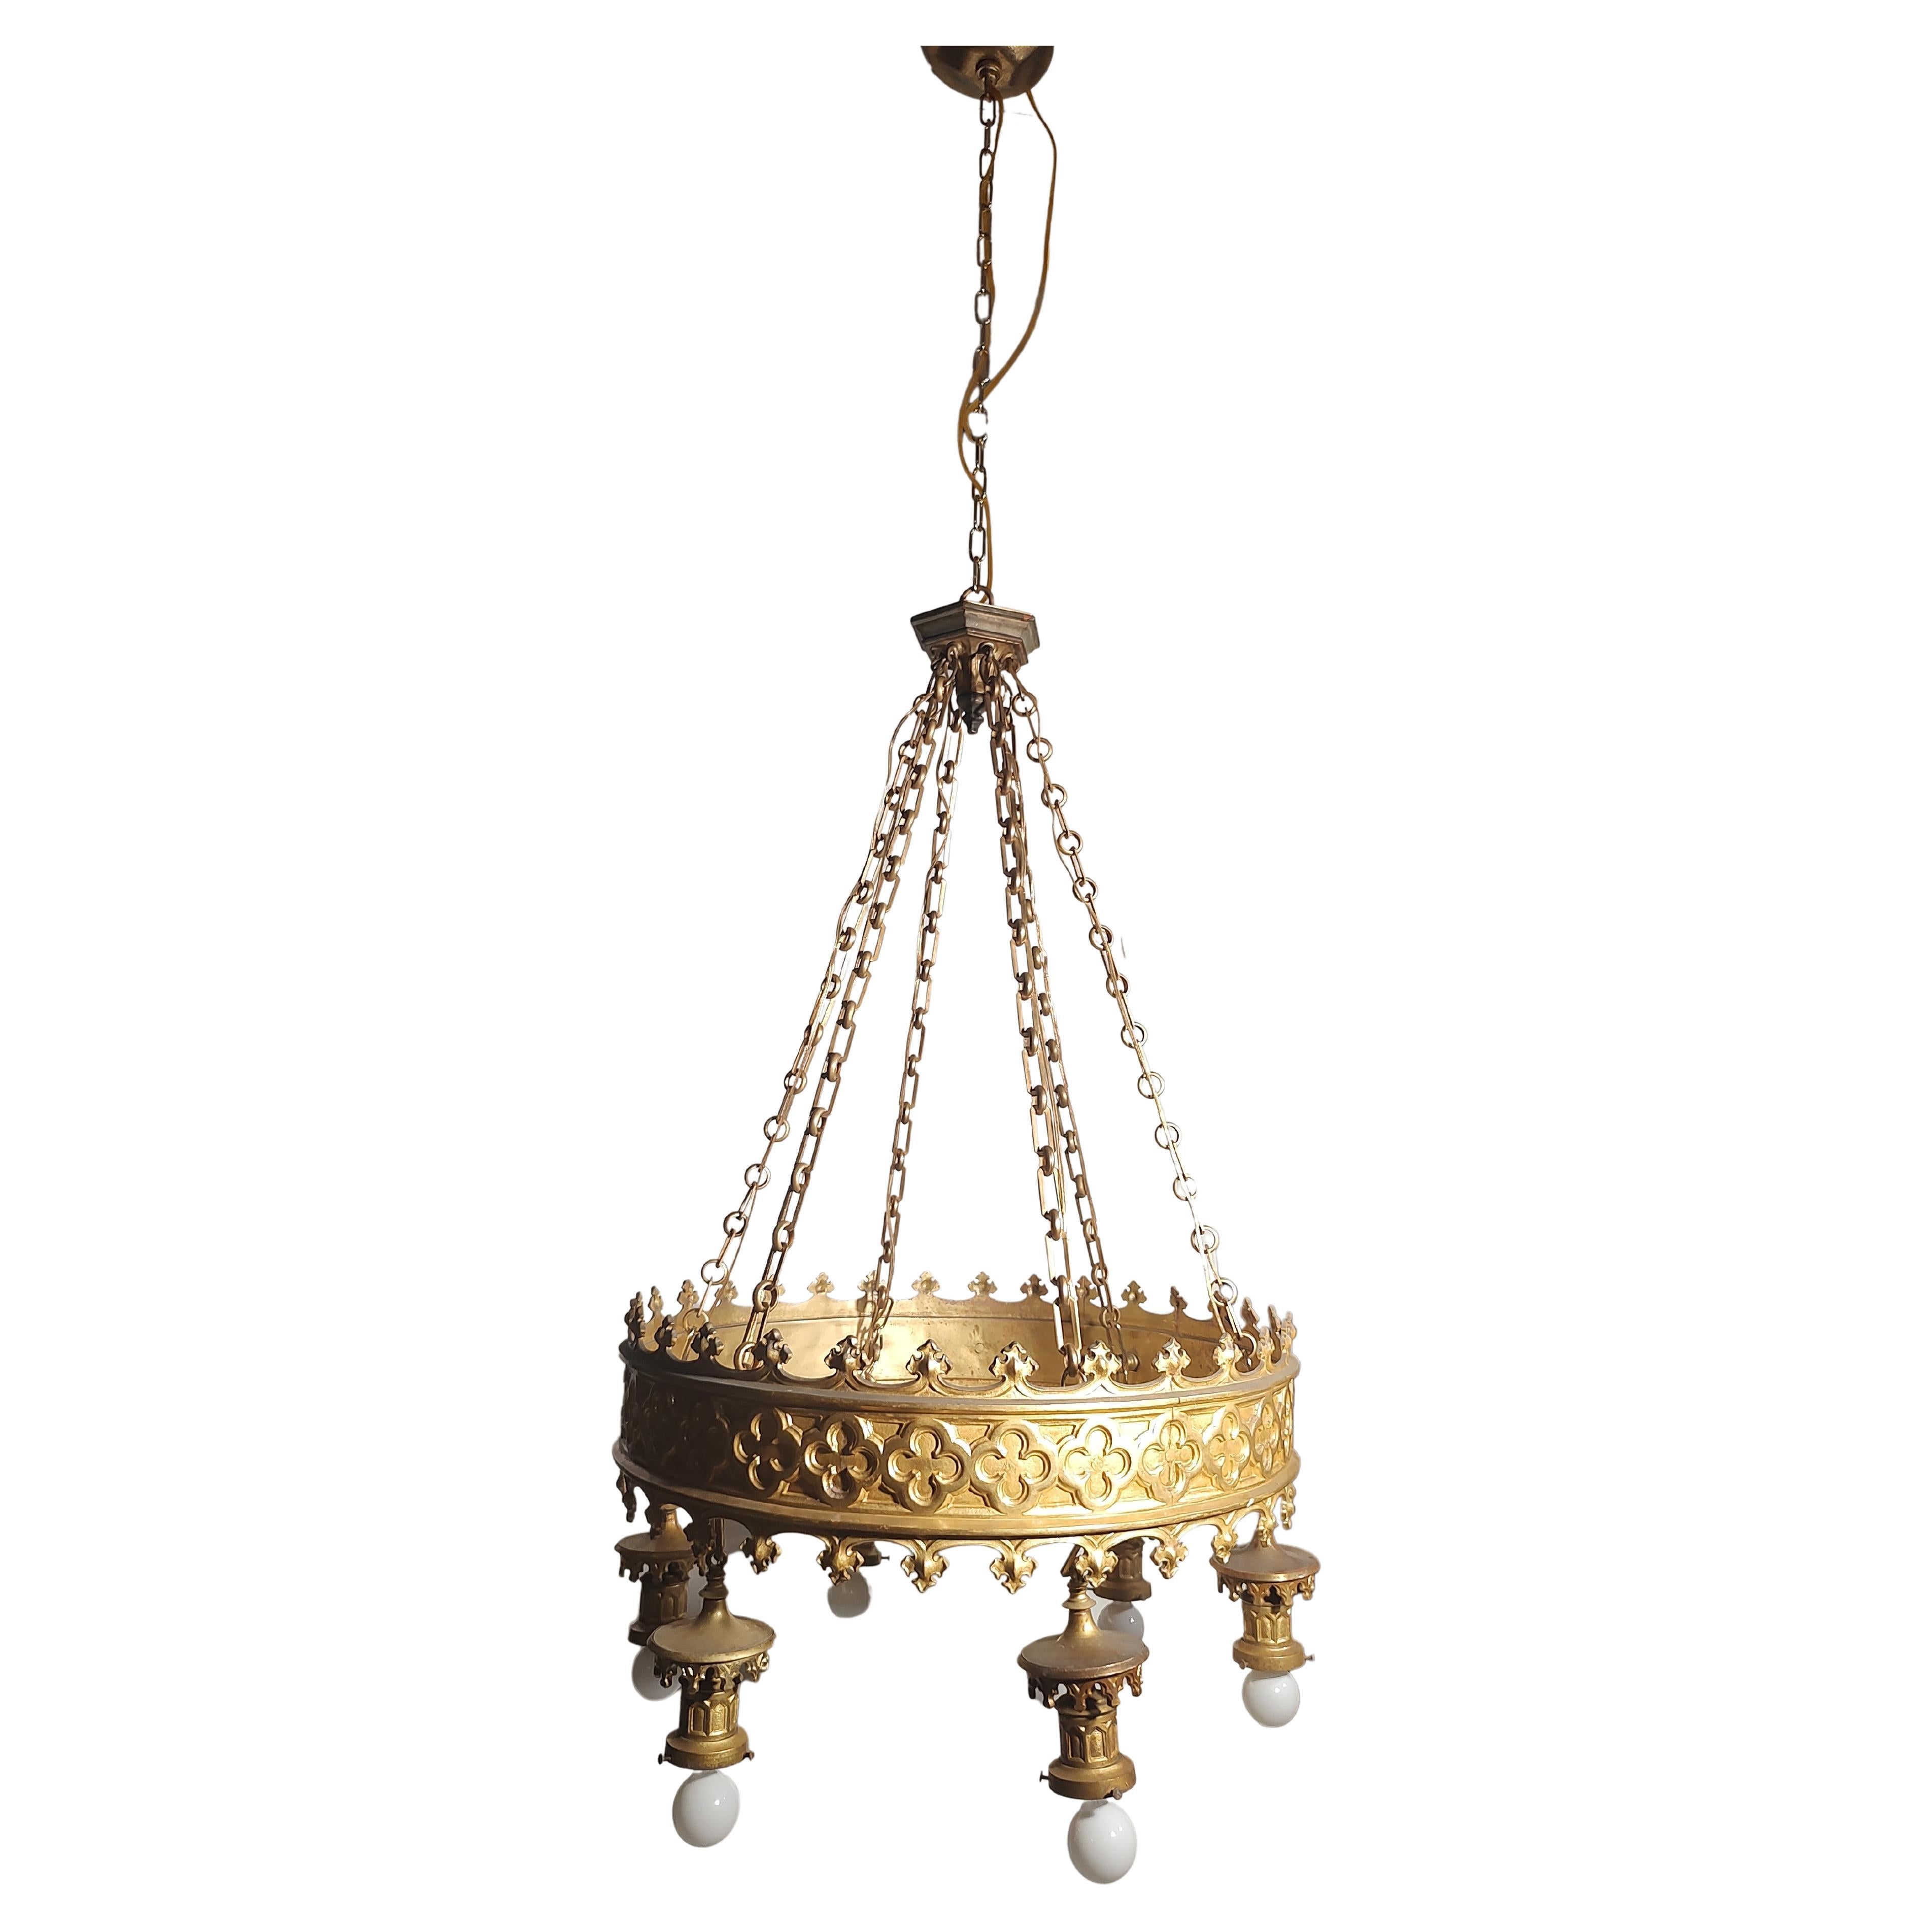 Arts & Crafts Art Deco Gilt Brass 6 Light Large Chandelier from a NJ Theatre  For Sale 2